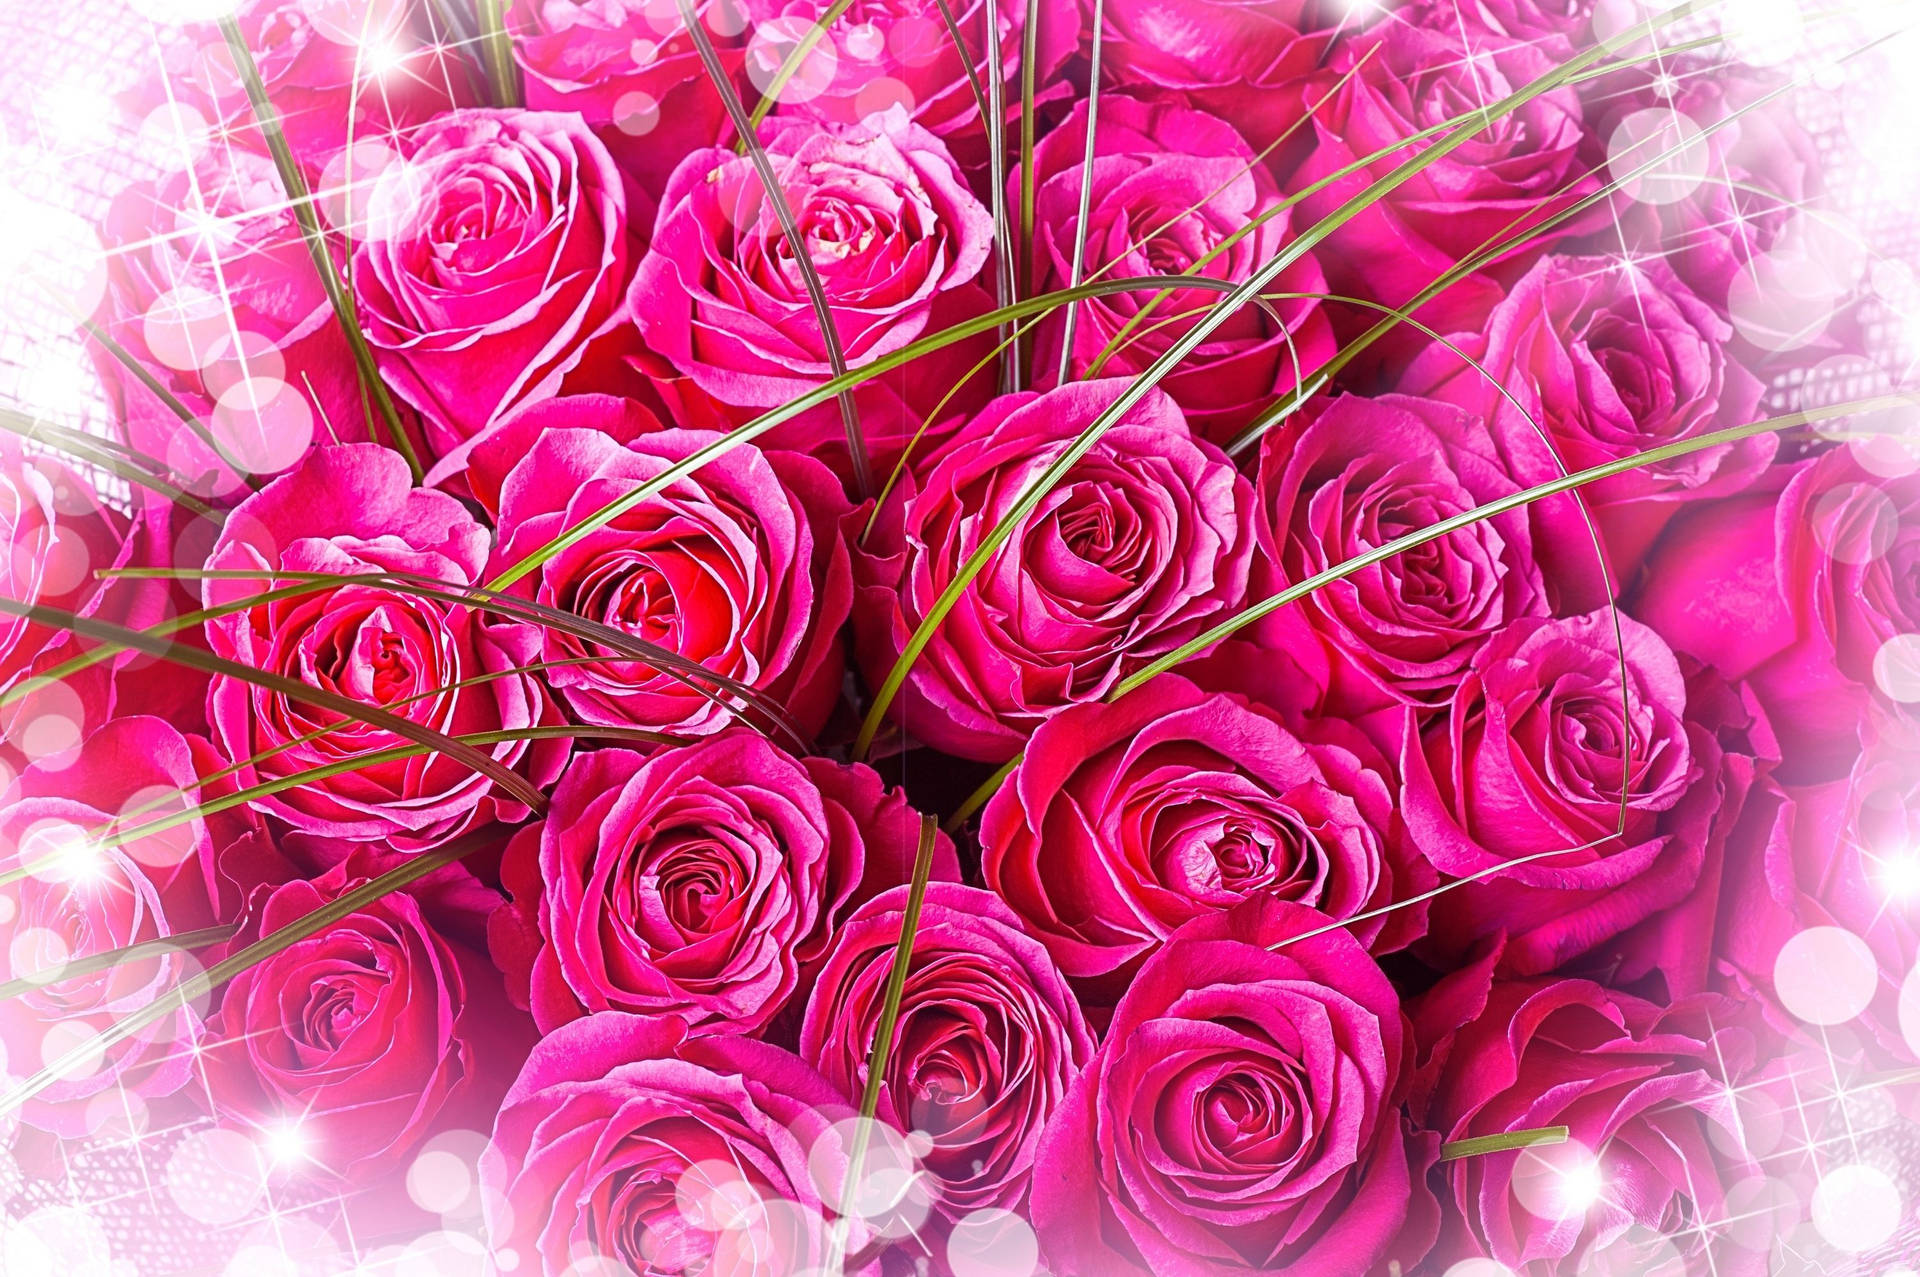 Bright Pink Roses Bouquet Wallpaper